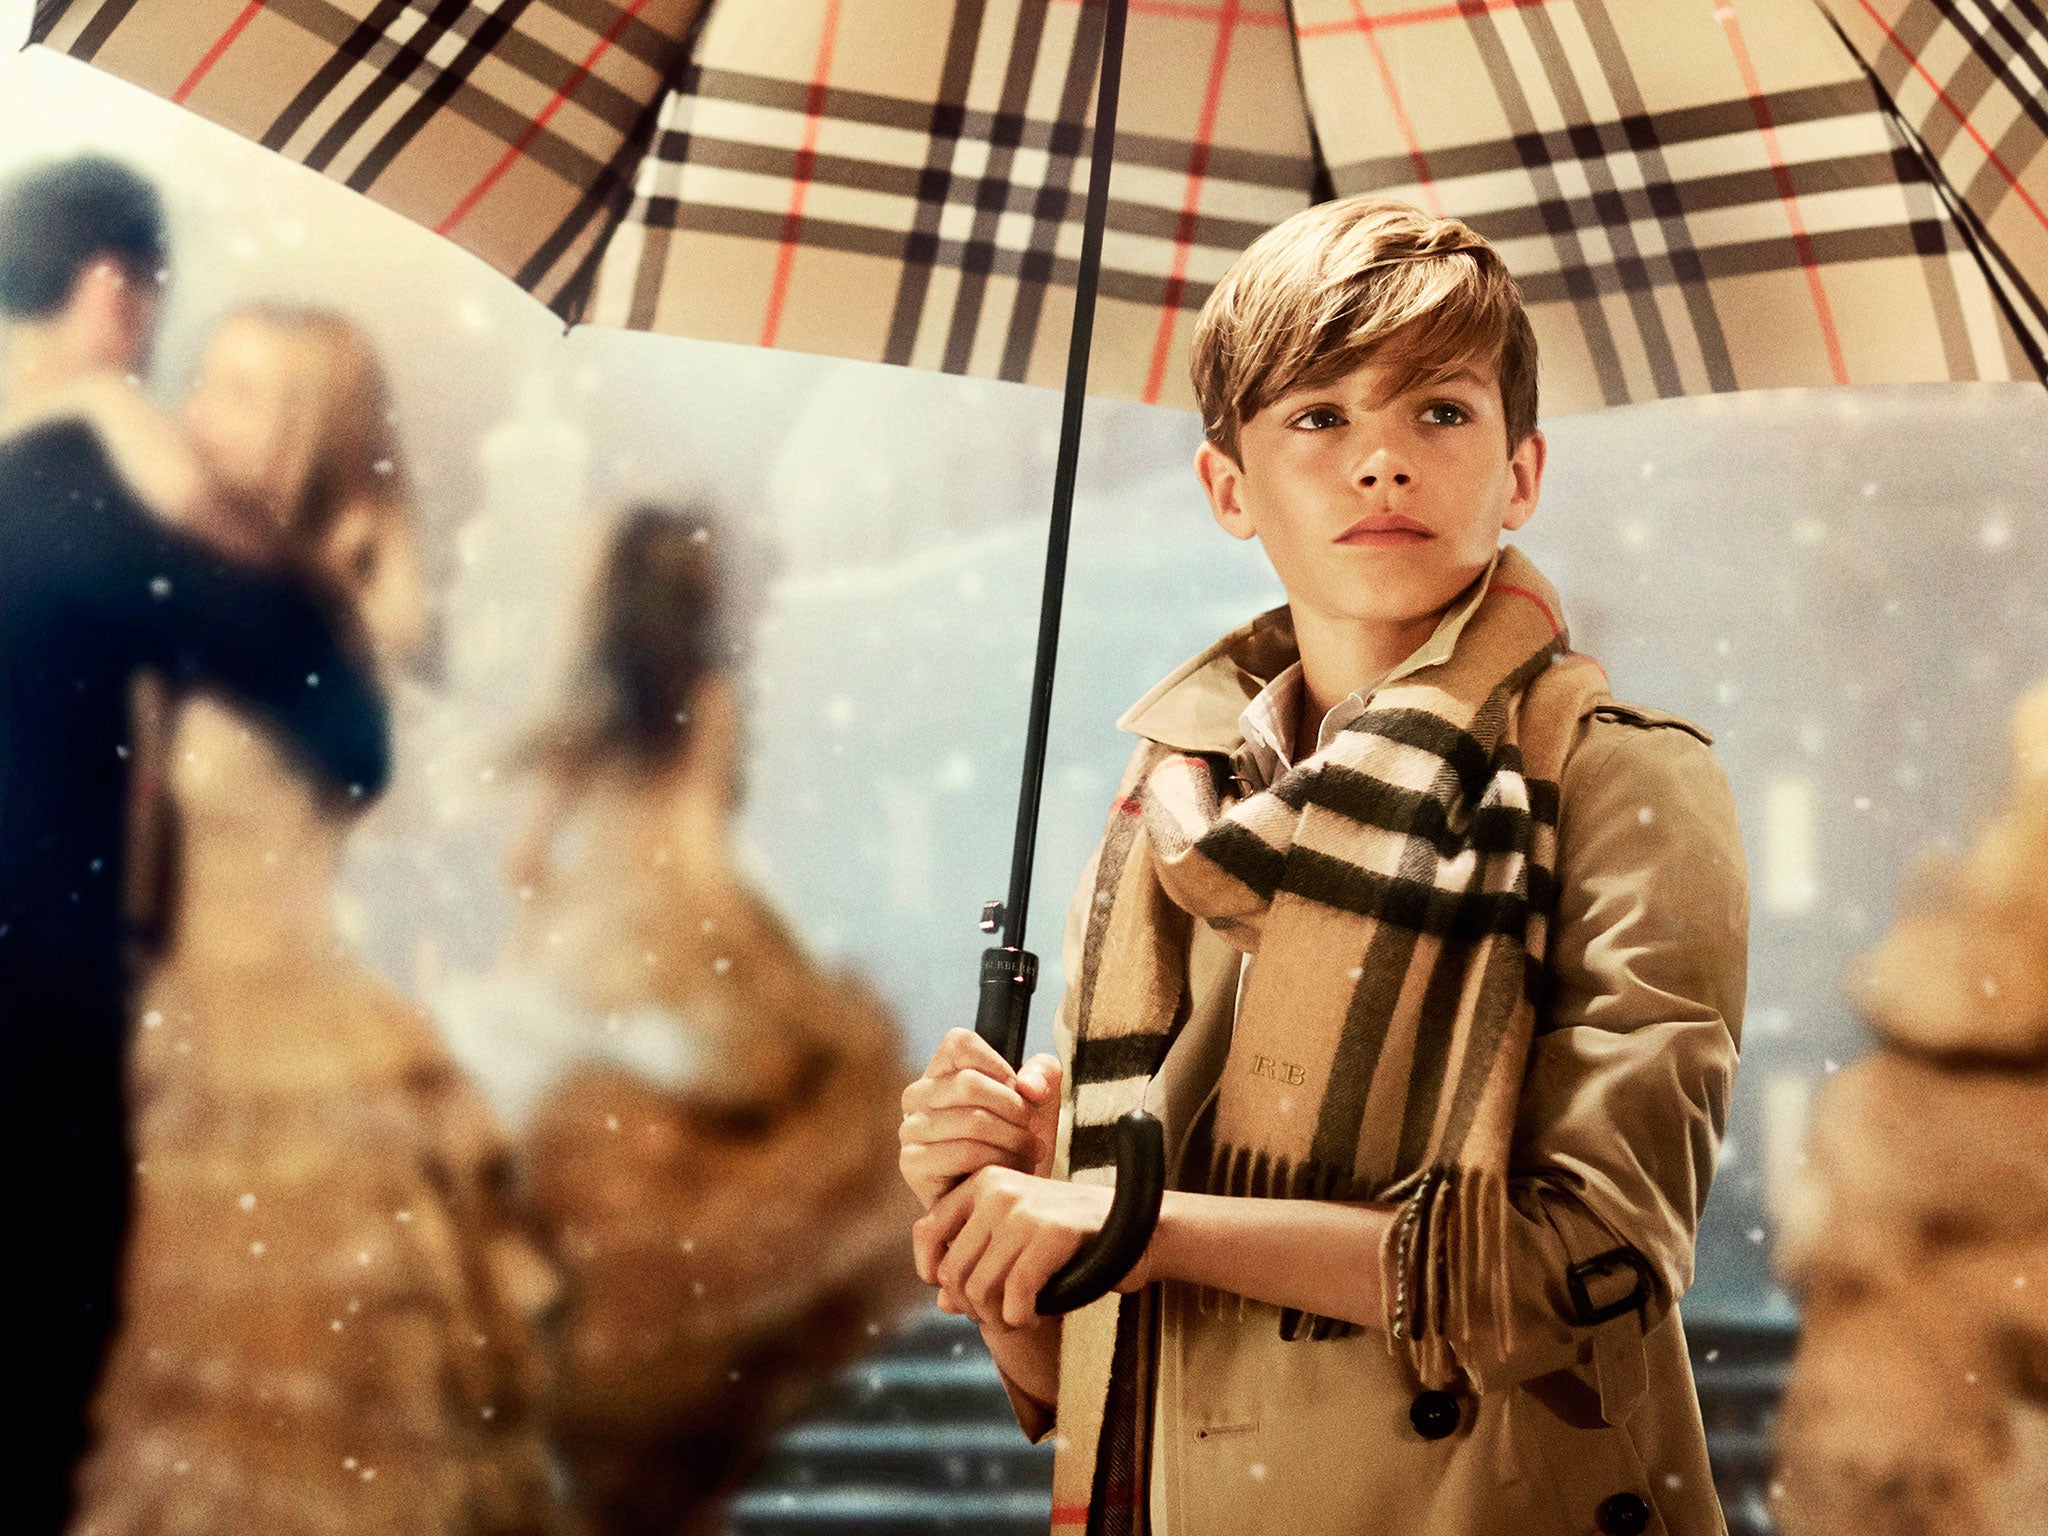 Romeo Beckham on Burberry's first ever Christmas campaign